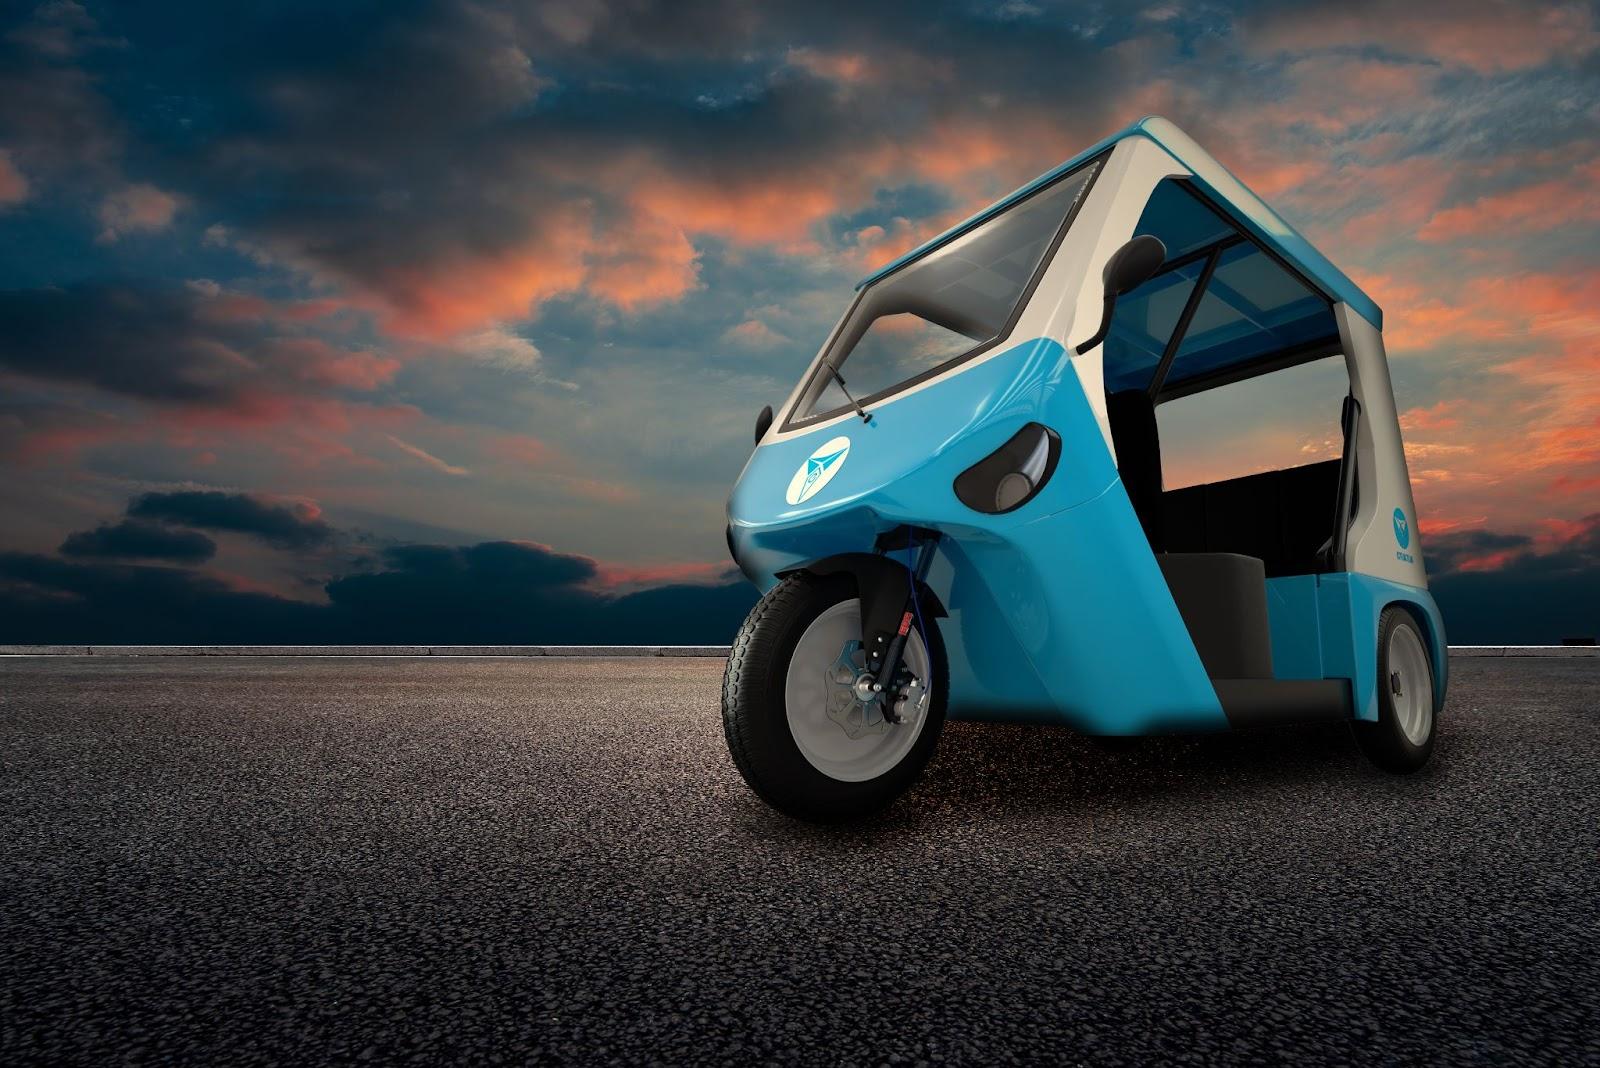 eTukTuk Strives to Bring Sustainable Transport to Developing Nations With Its Innovative Three-Wheeler EV and Charging Infrastructure